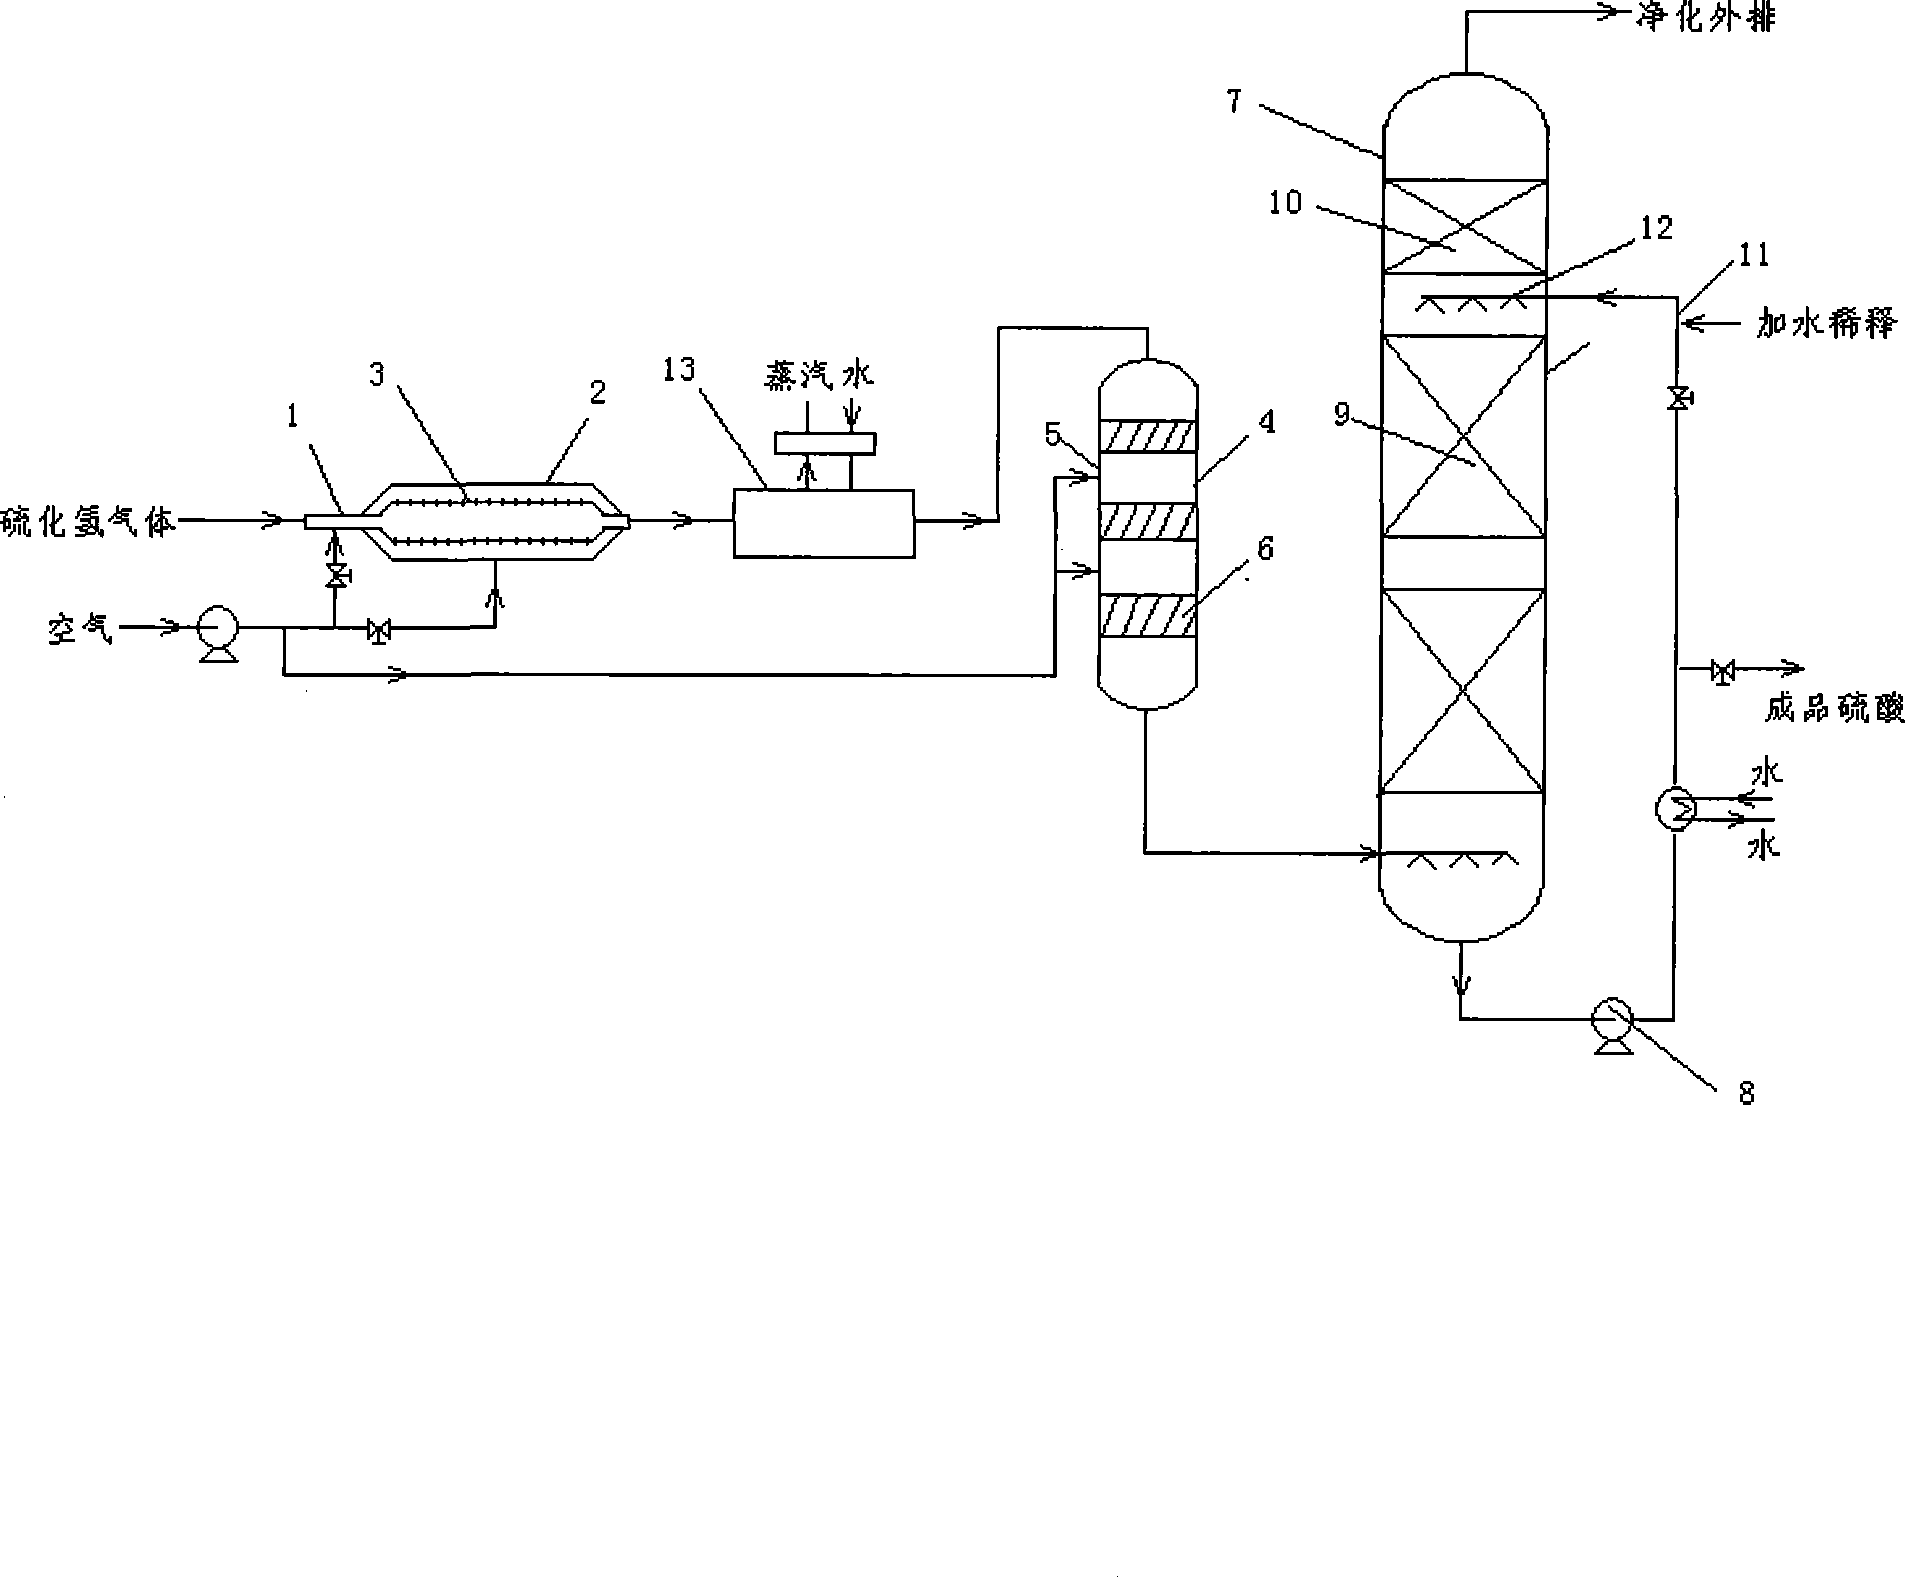 Process for preparing sulfuric acid by sulfurated hydrogen stepwise reaction